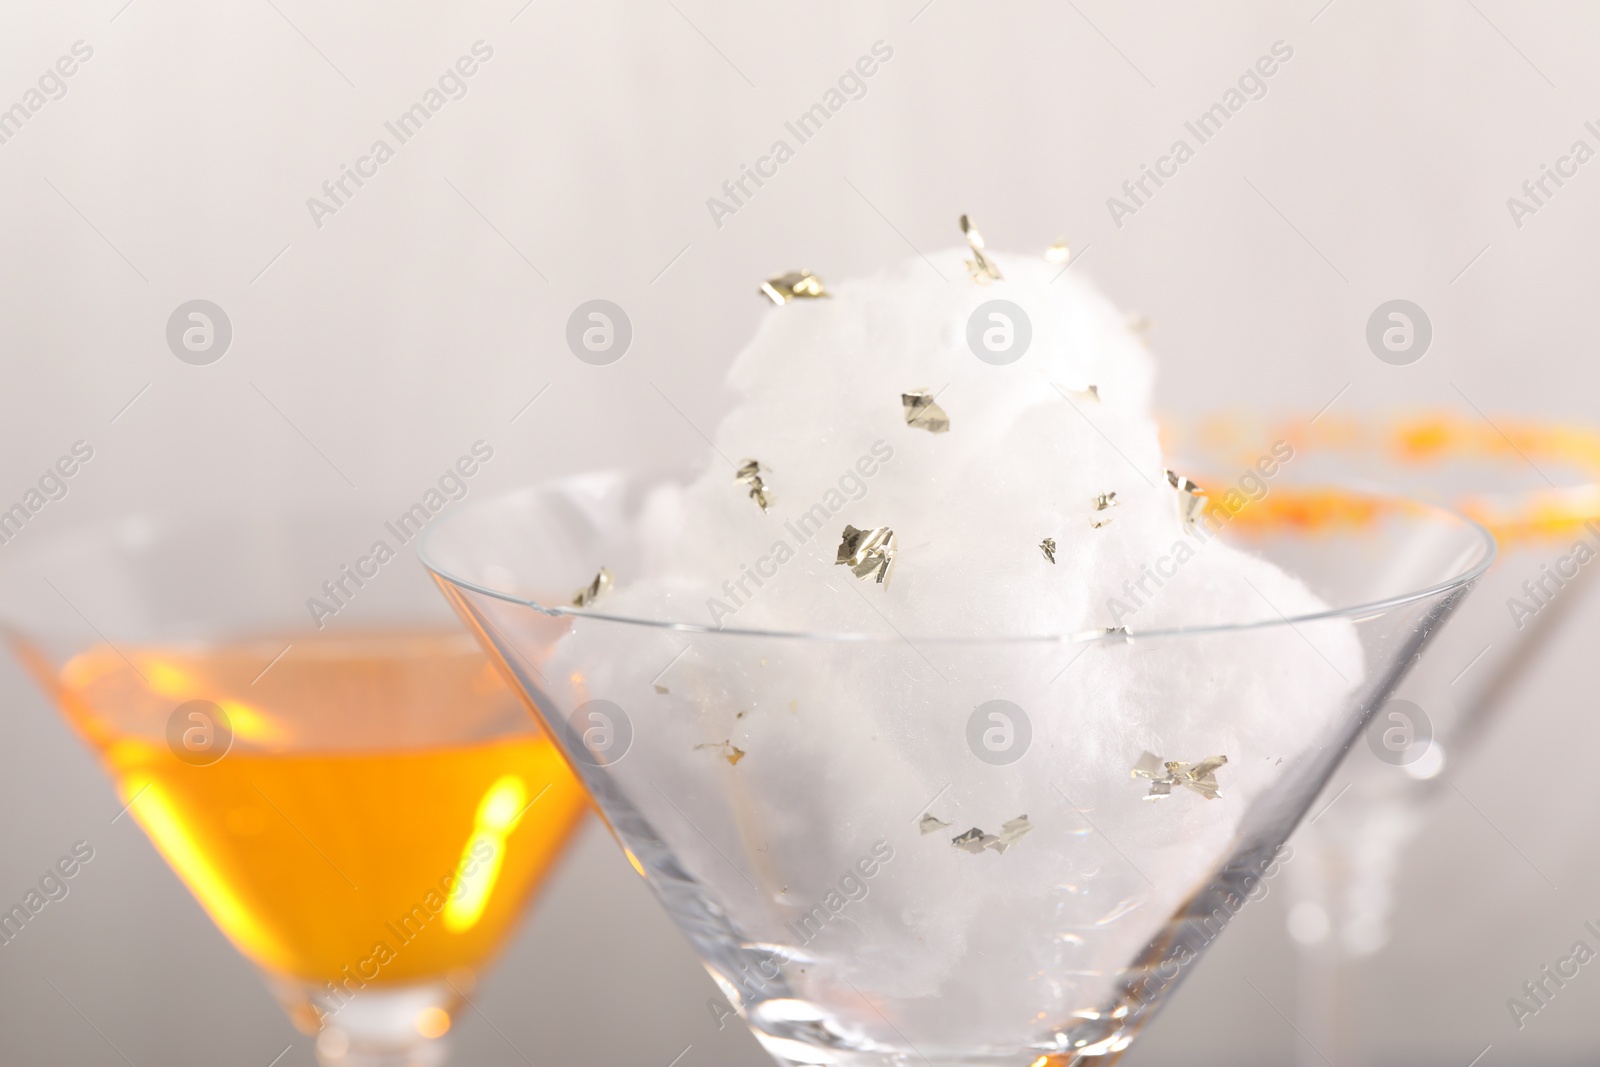 Photo of Tasty cotton candy cocktail in glass and other alcoholic drinks on gray background, closeup